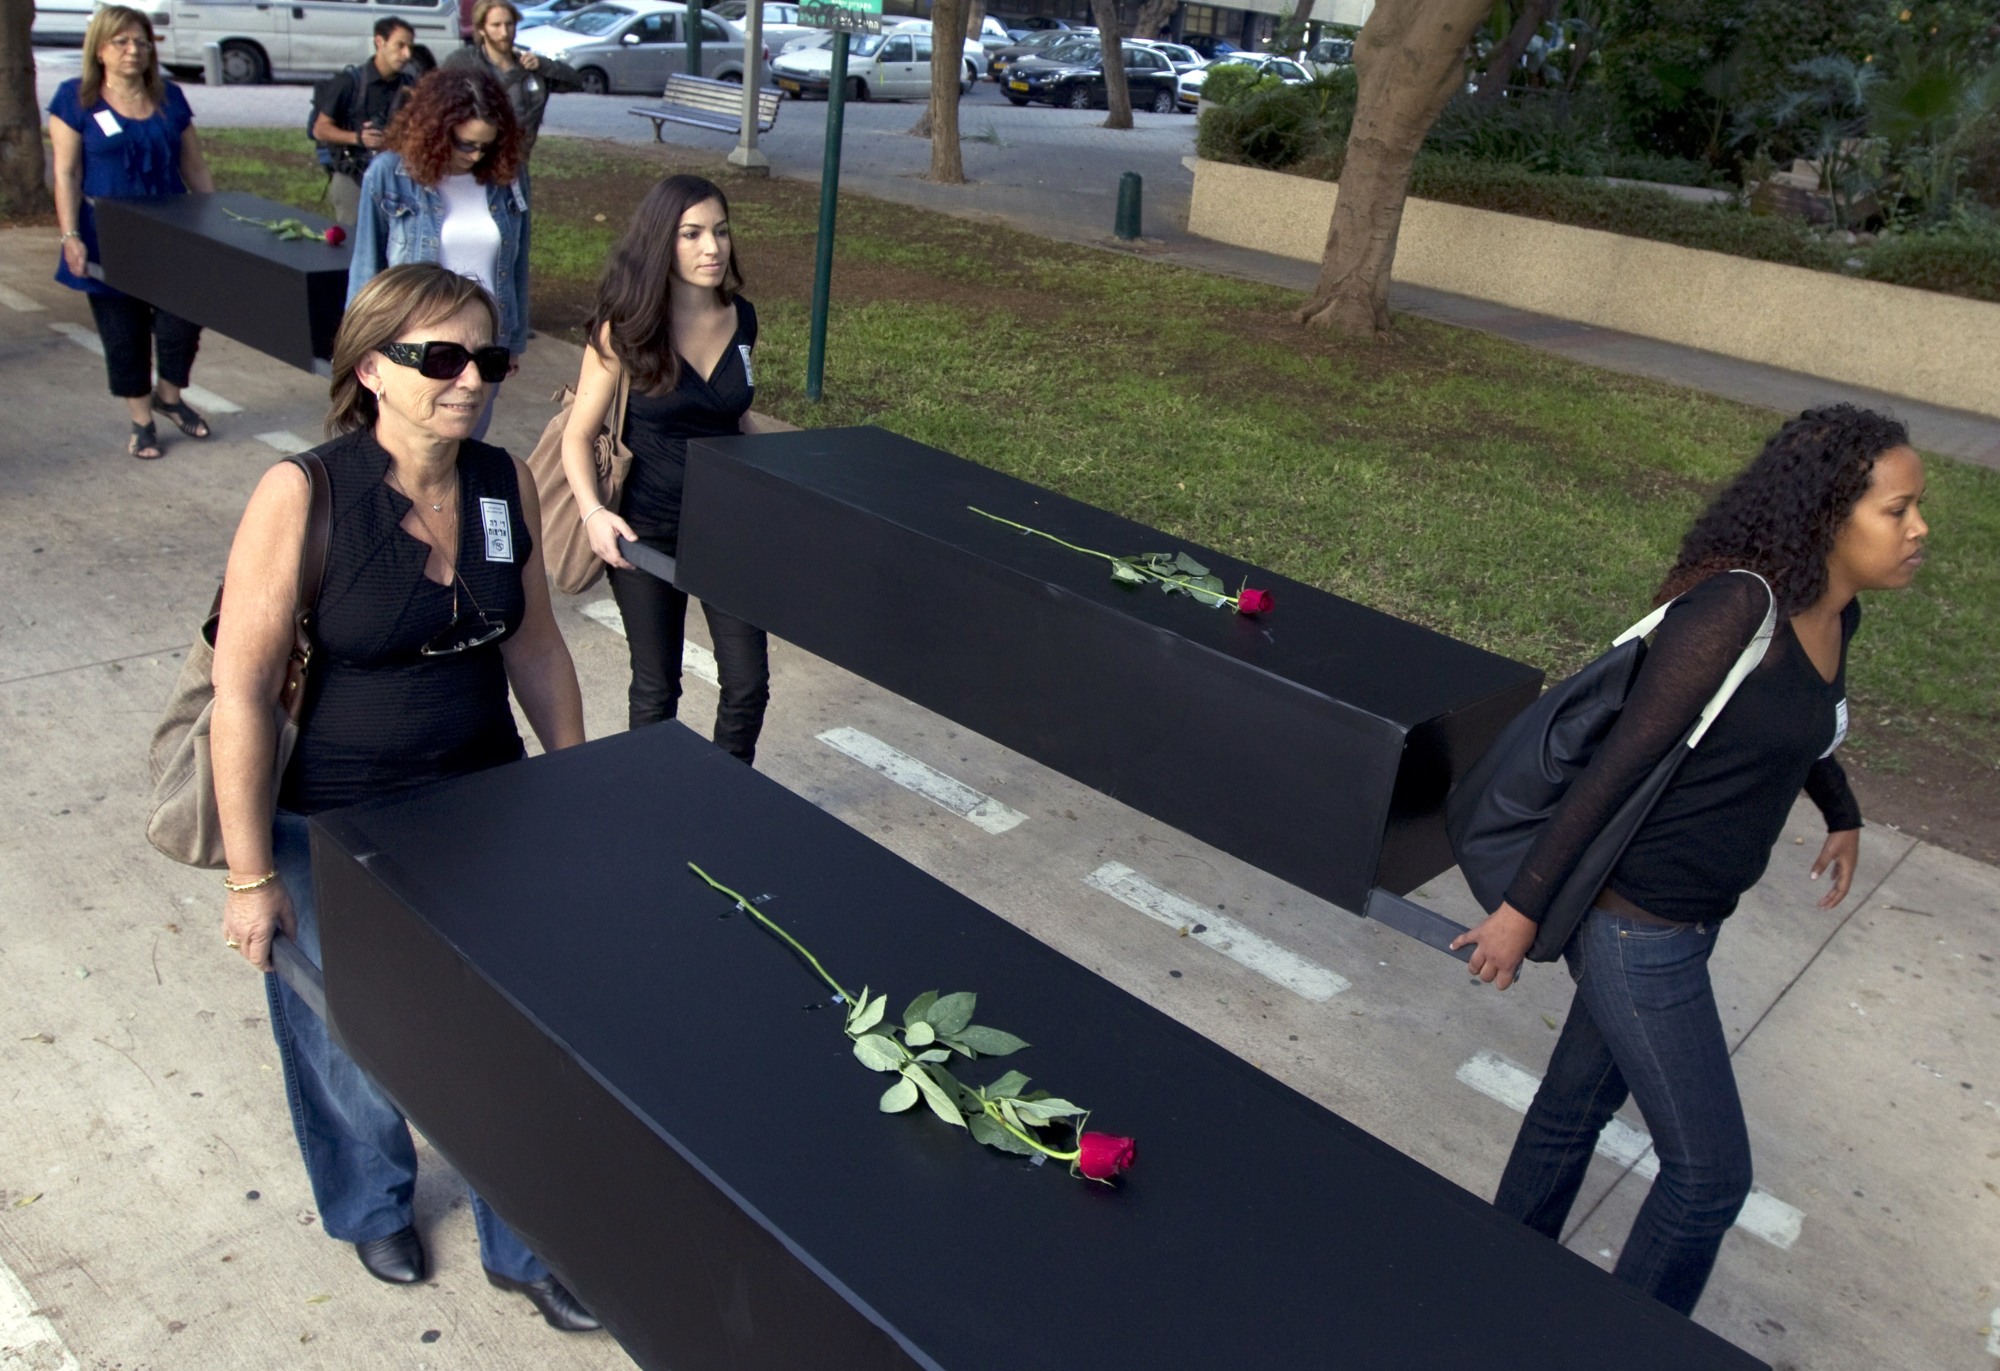 Israelis take part in a mock funeral to raise the alarm over the growing number of women being killed in incidents of domestic violence across Israel on 25 November 2010 in Tel Aviv (AFP)